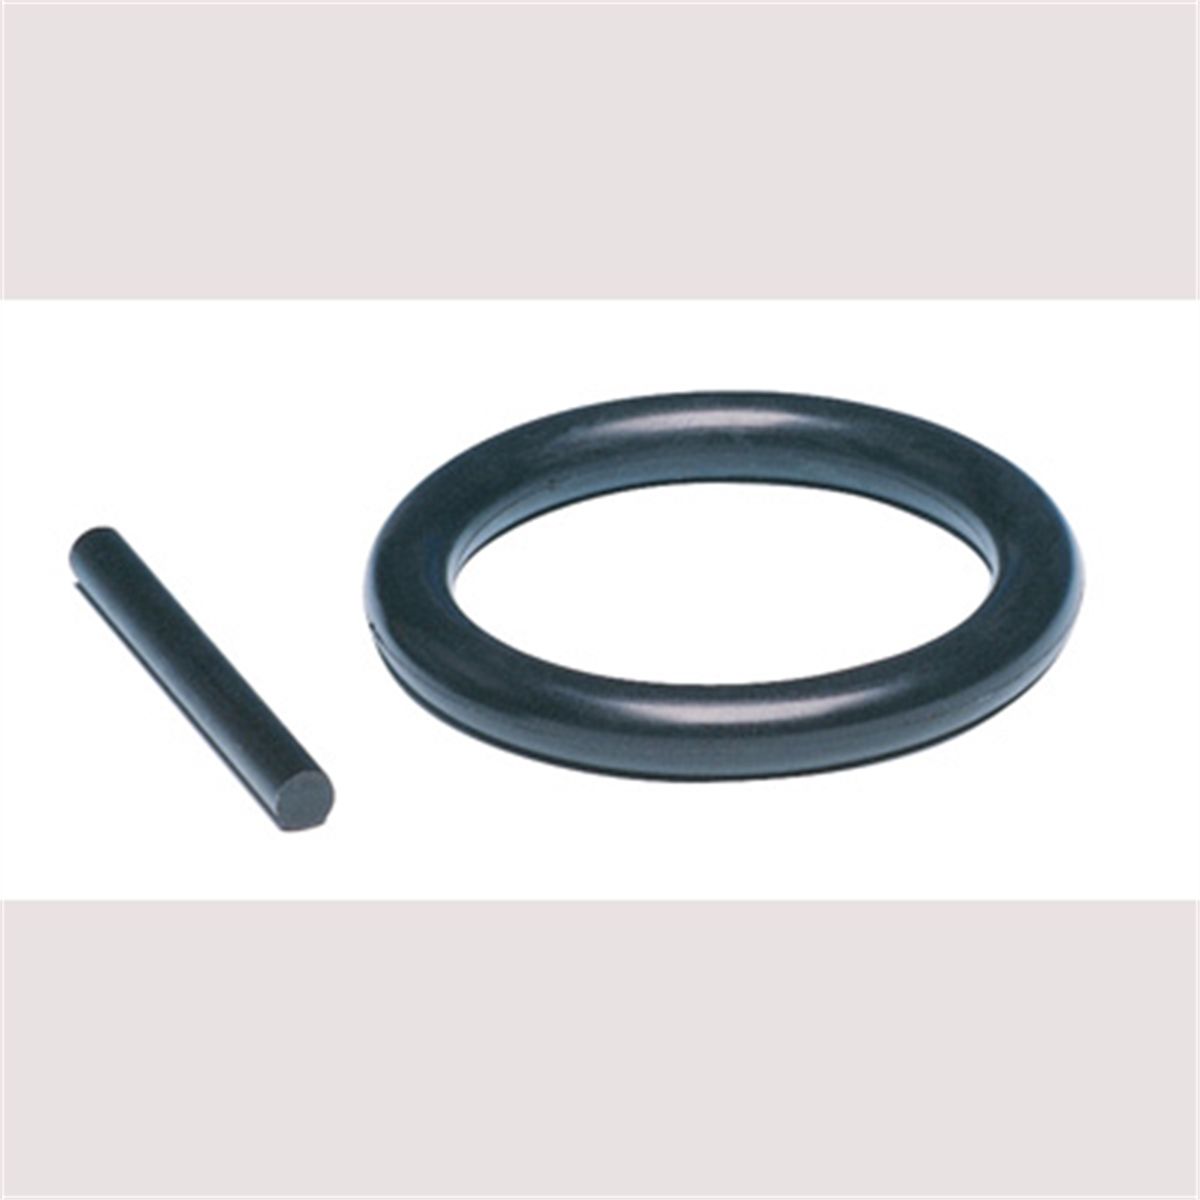 O-Ring 3/4" Drive 1.42" - 1.57" (36mm-40mm)